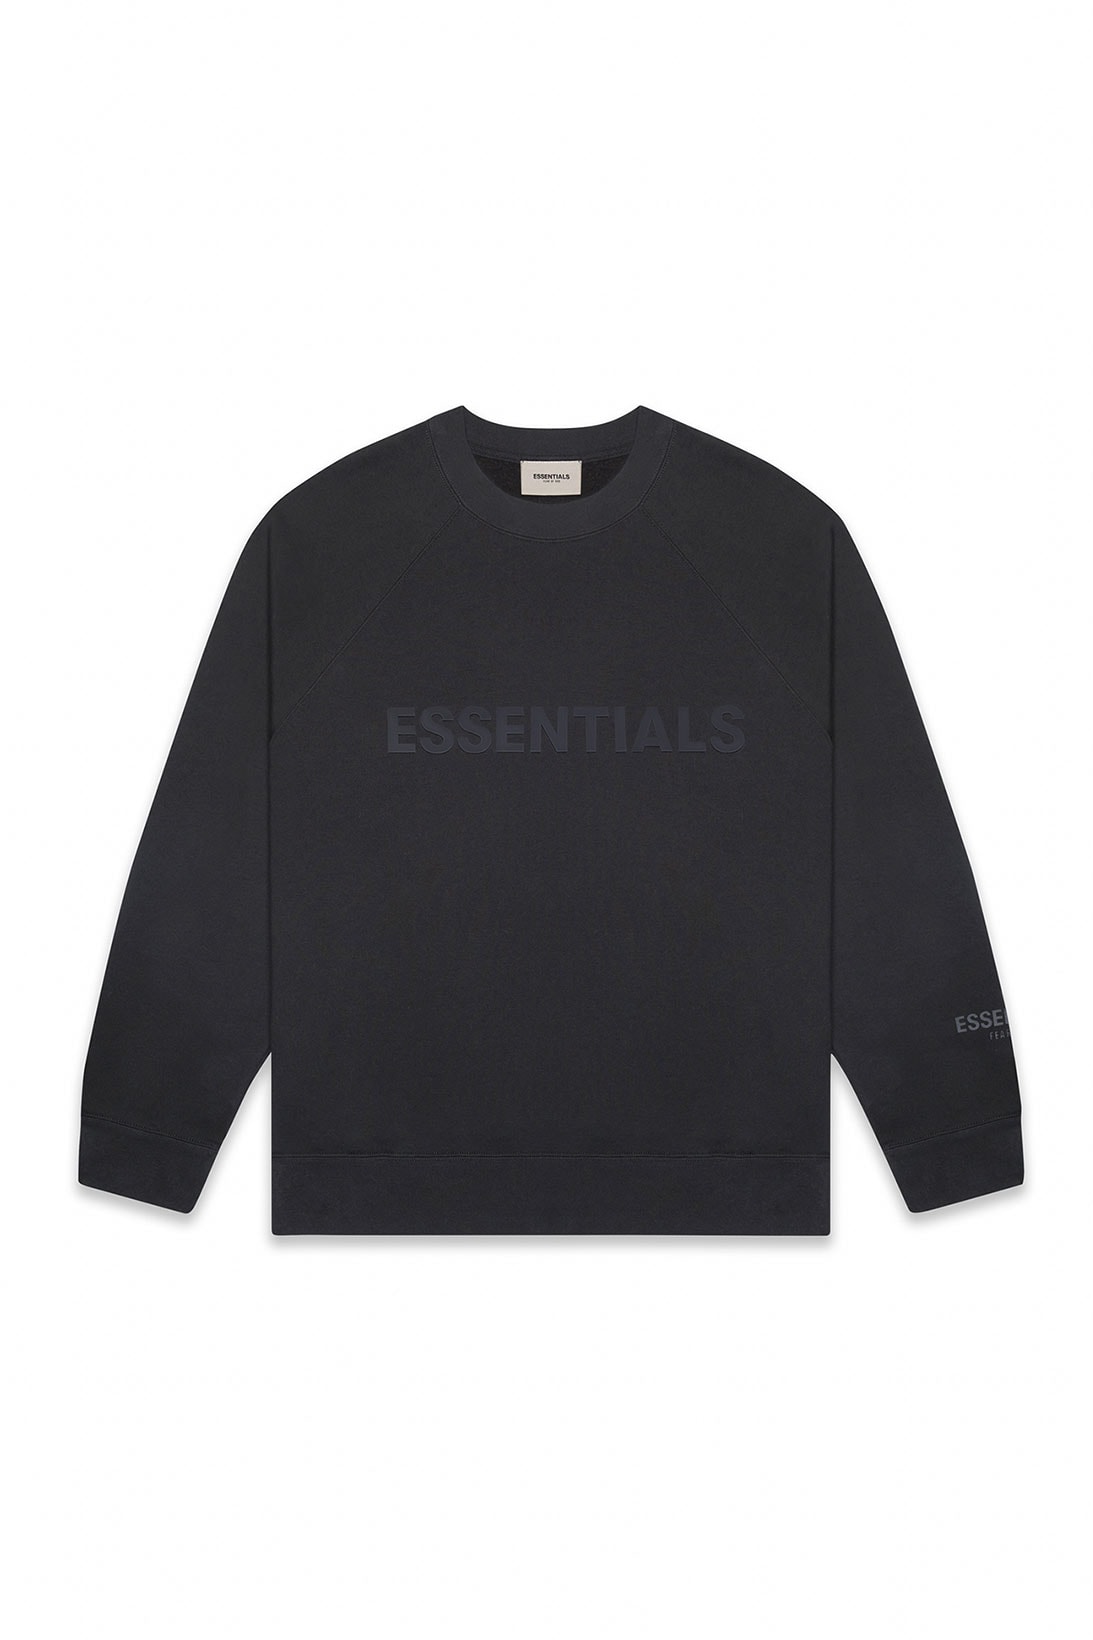 fear of god fog essentials fall winter drop 2 hoodies sweaters tracksuits release